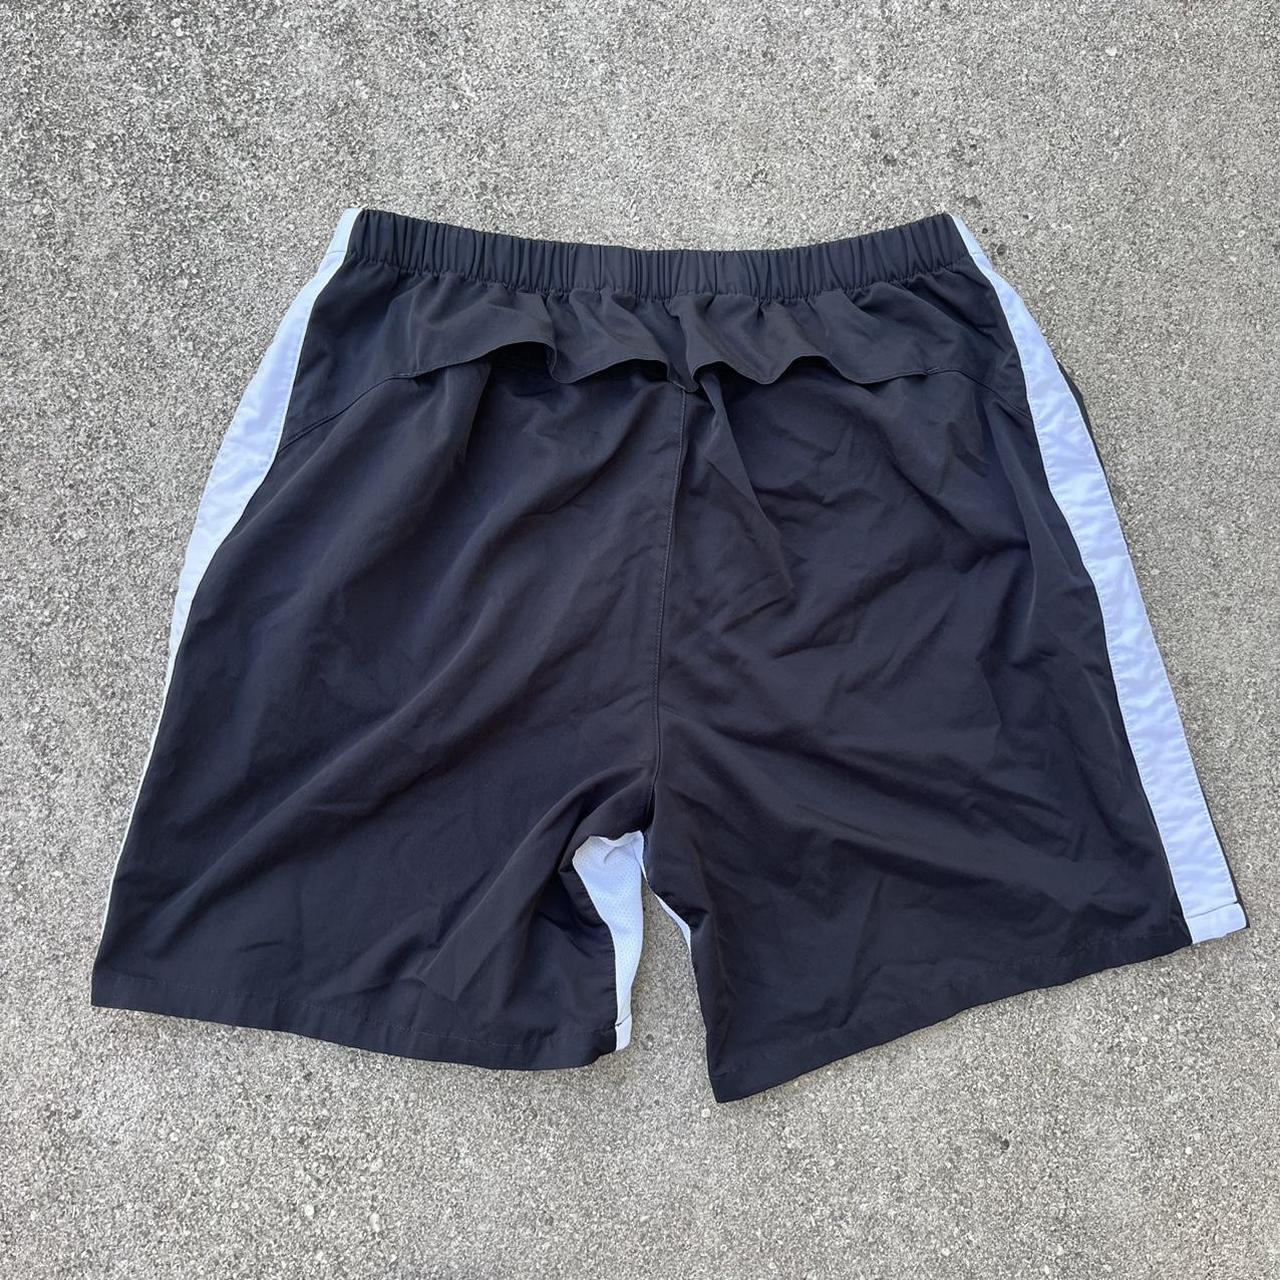 Mens Polo Black and White Athletic Casual Shorts... - Depop